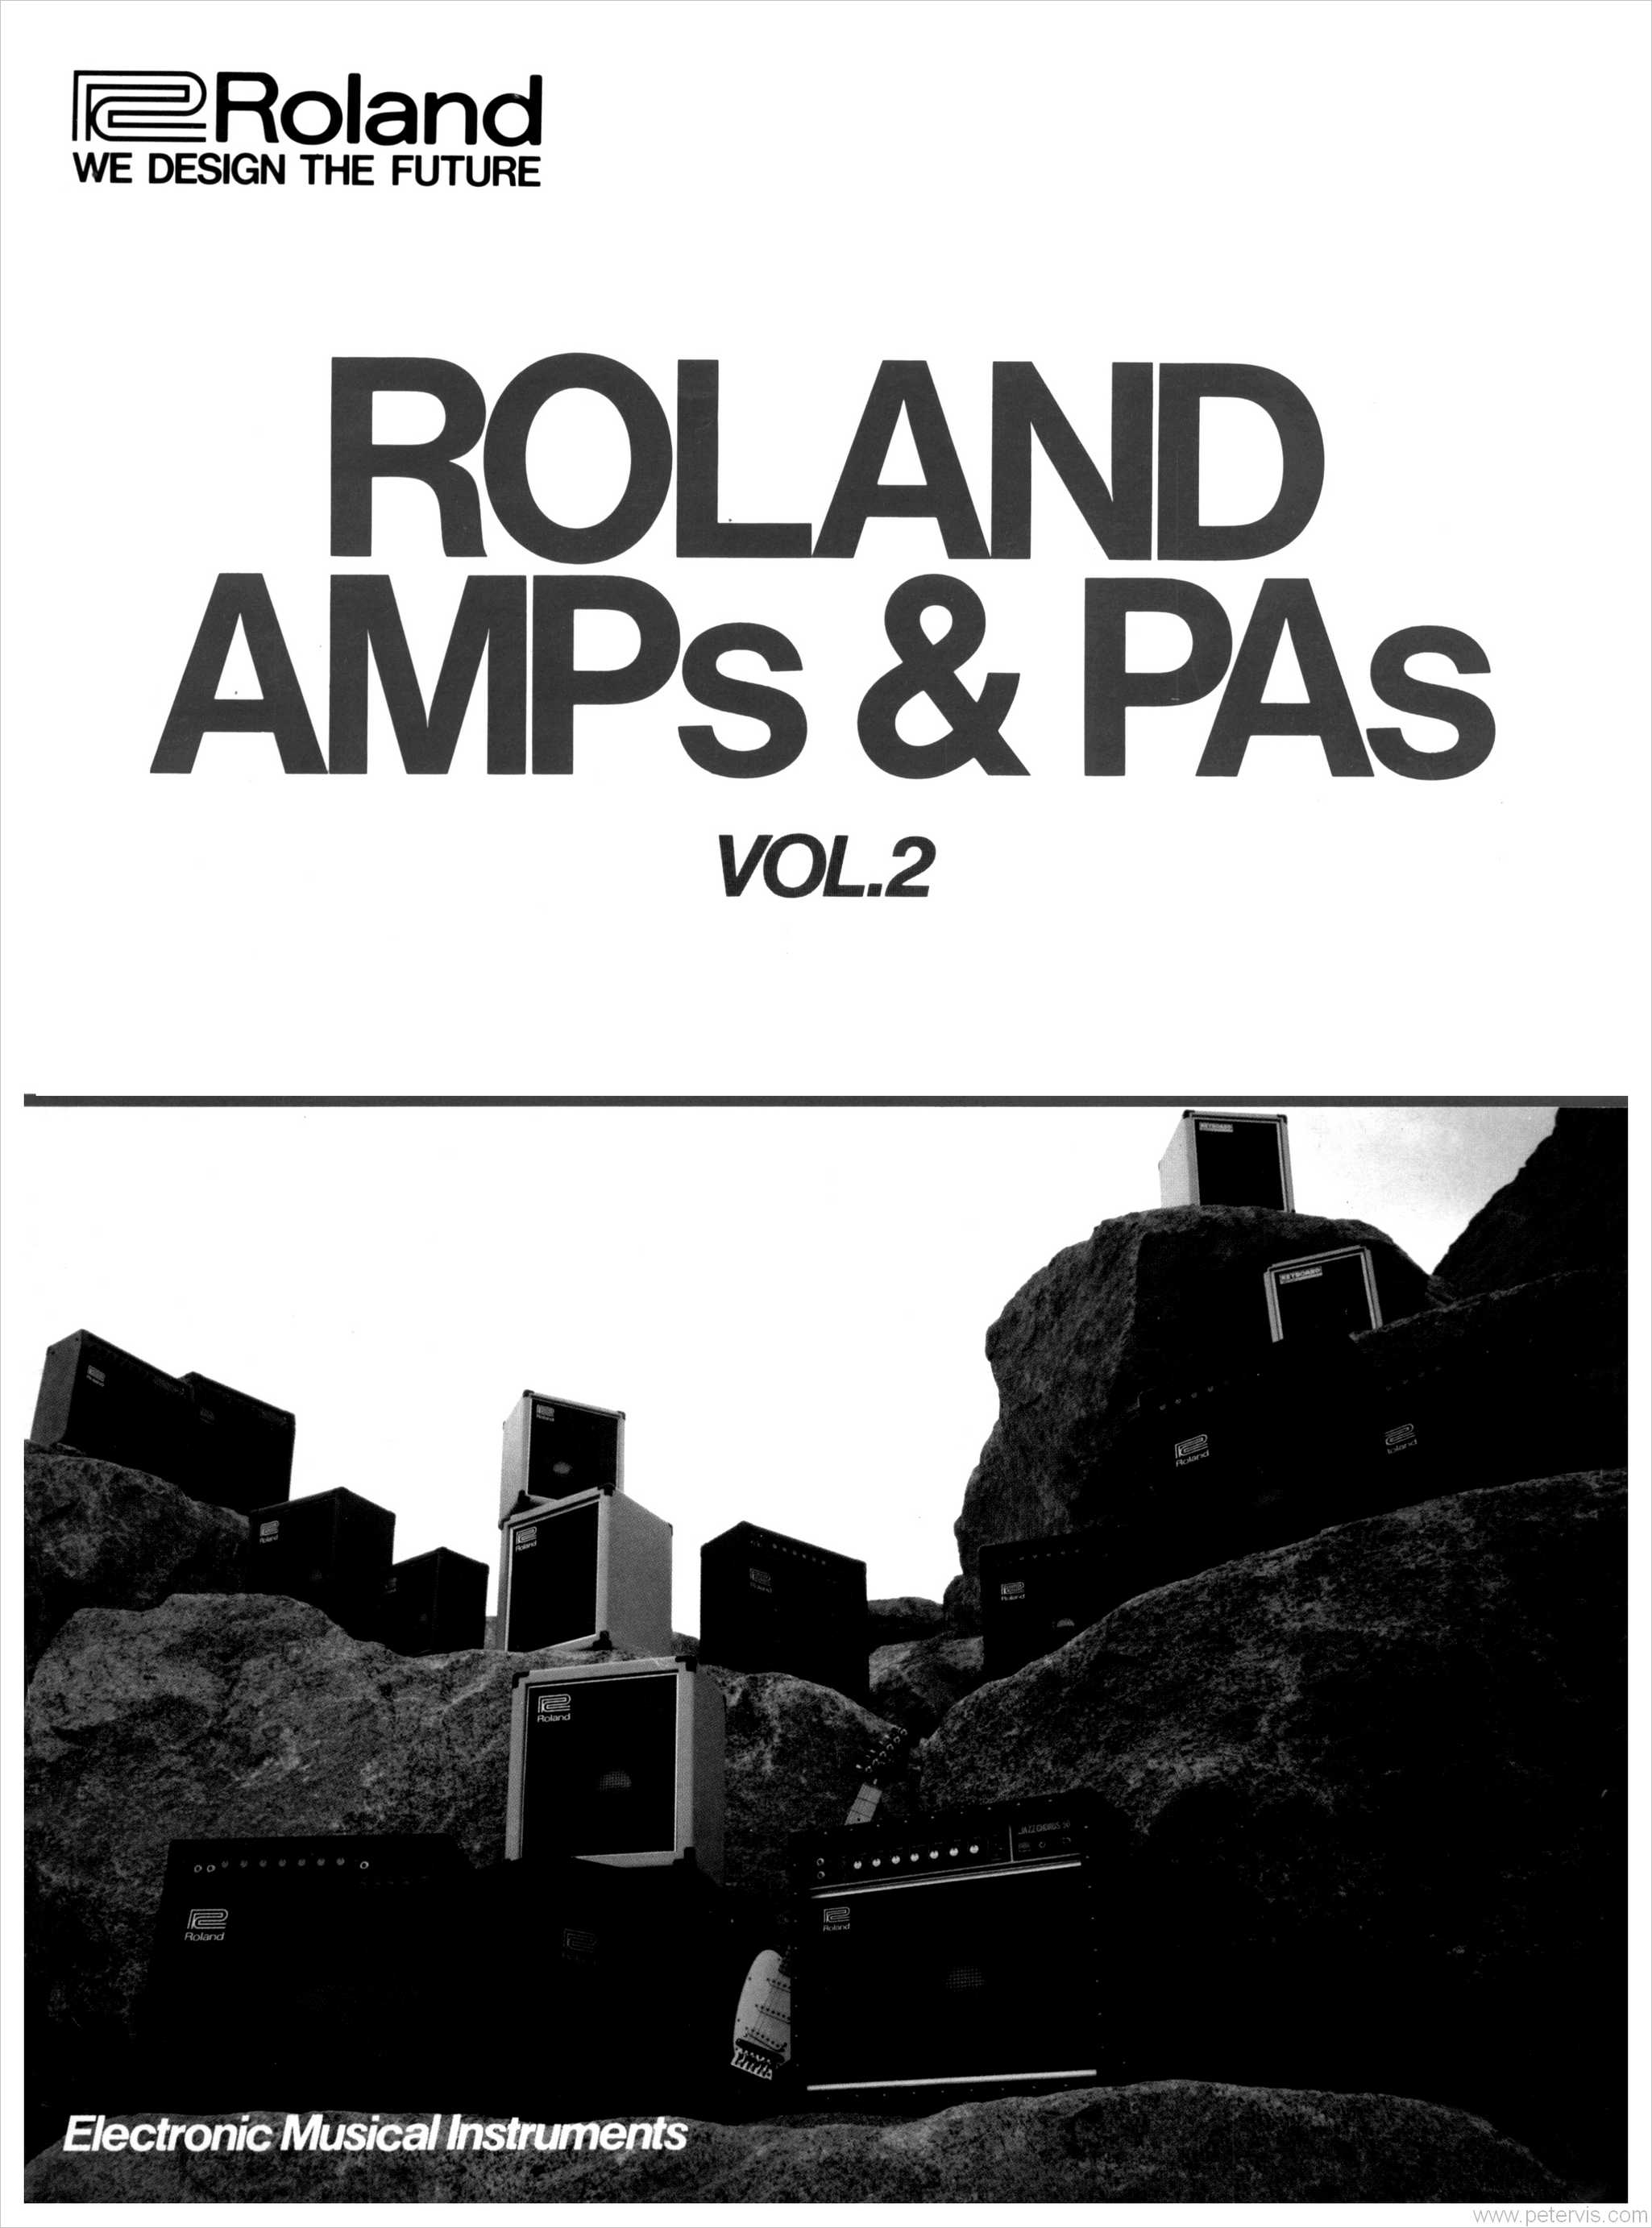 ROLAND AMPs AND PAs VOLUME 2